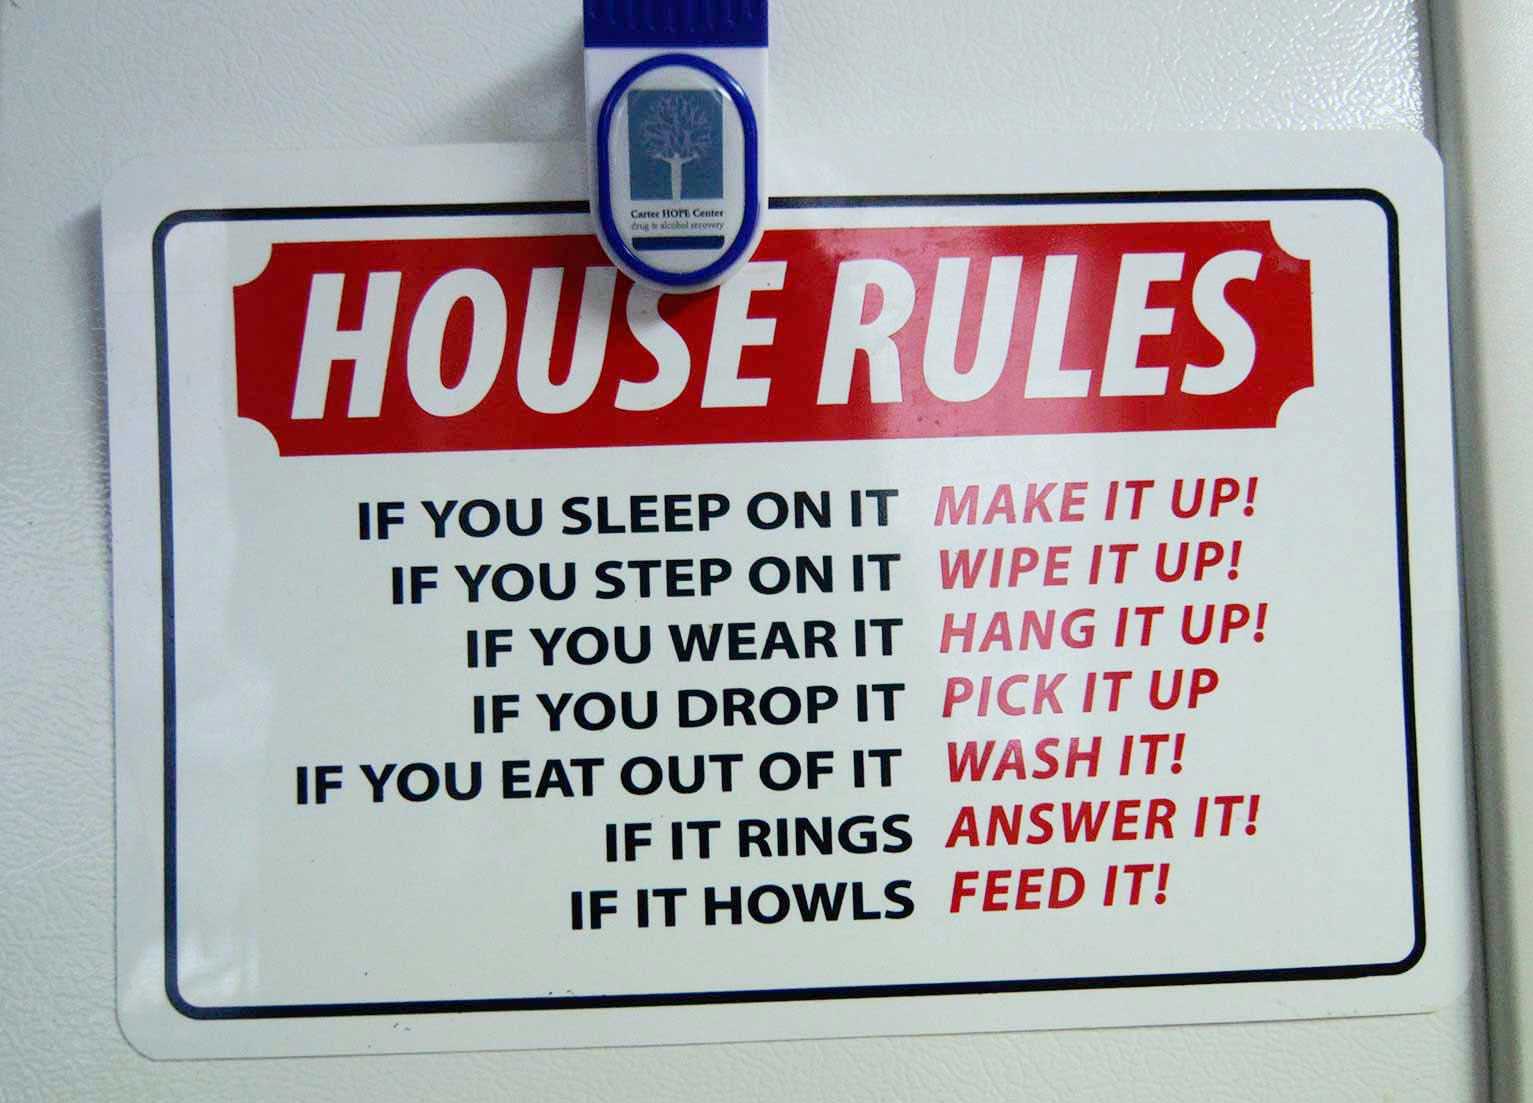 A list of house rules is posted on the refrigerator at the house.